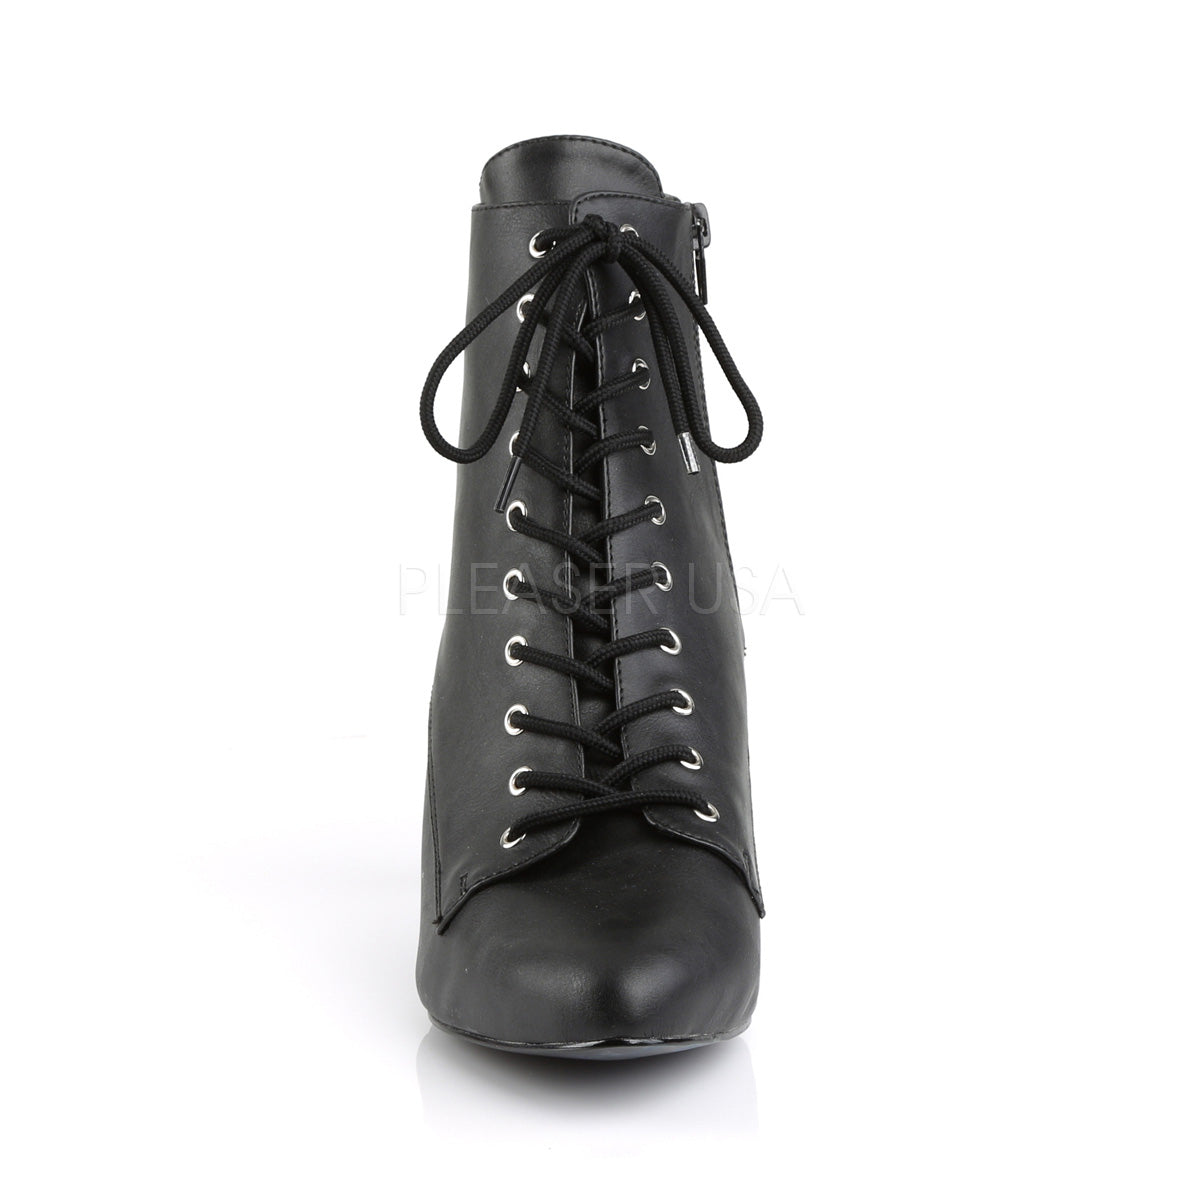 Divine Large Sizes Victorian Ankle Boots